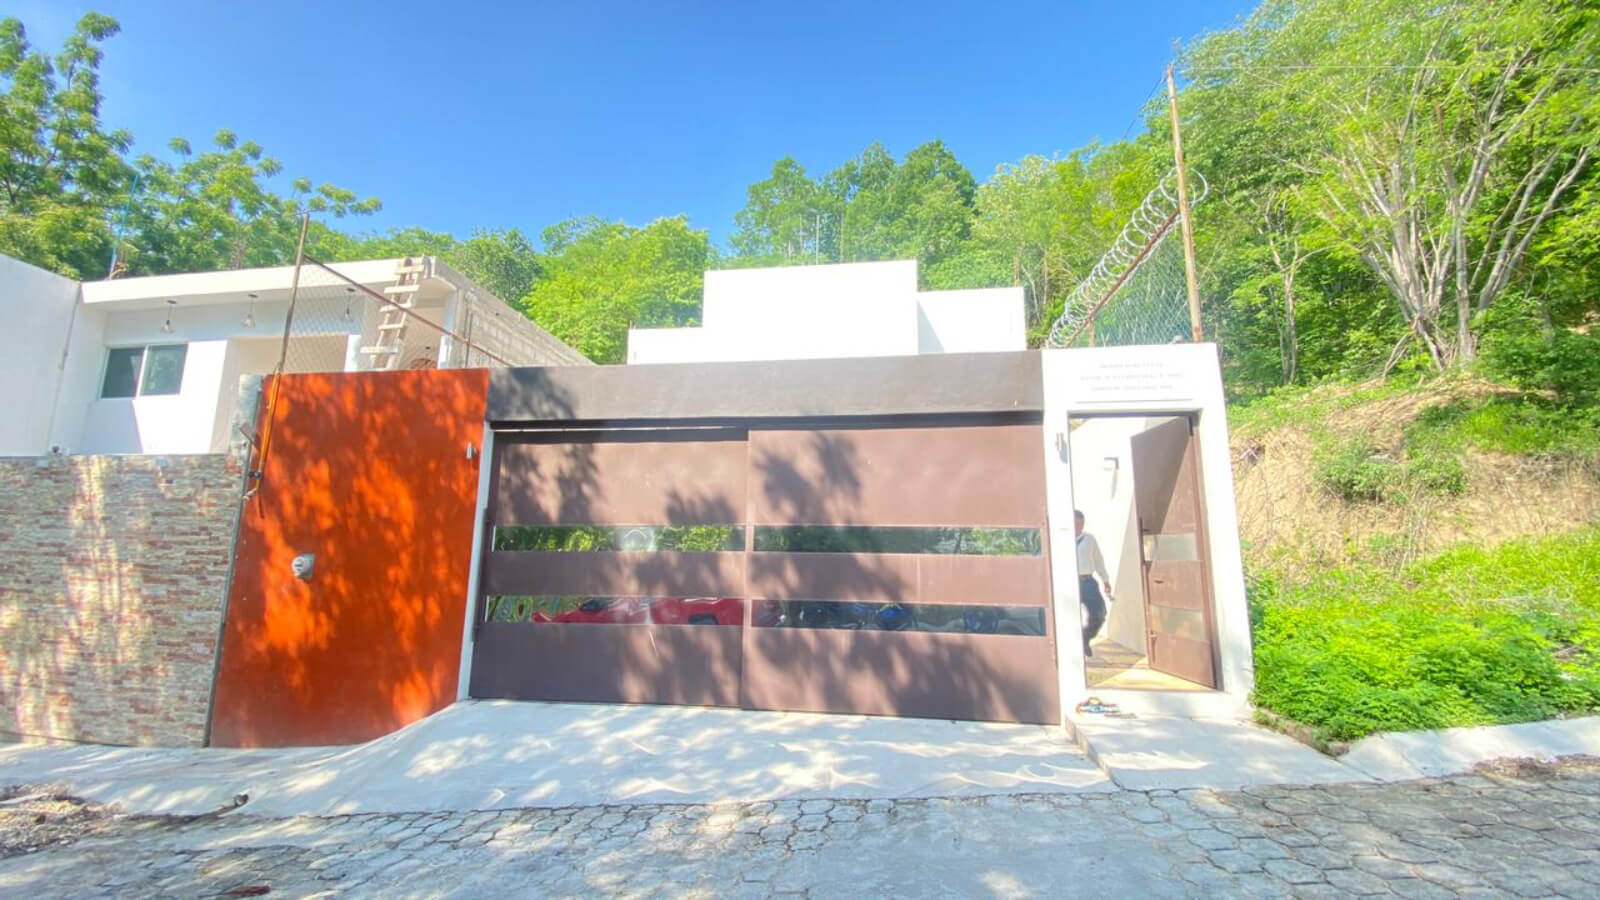 House in gated community with pool, jacuzzi, barbecue grill, playground for children, for sale, Sector O Huatulco.